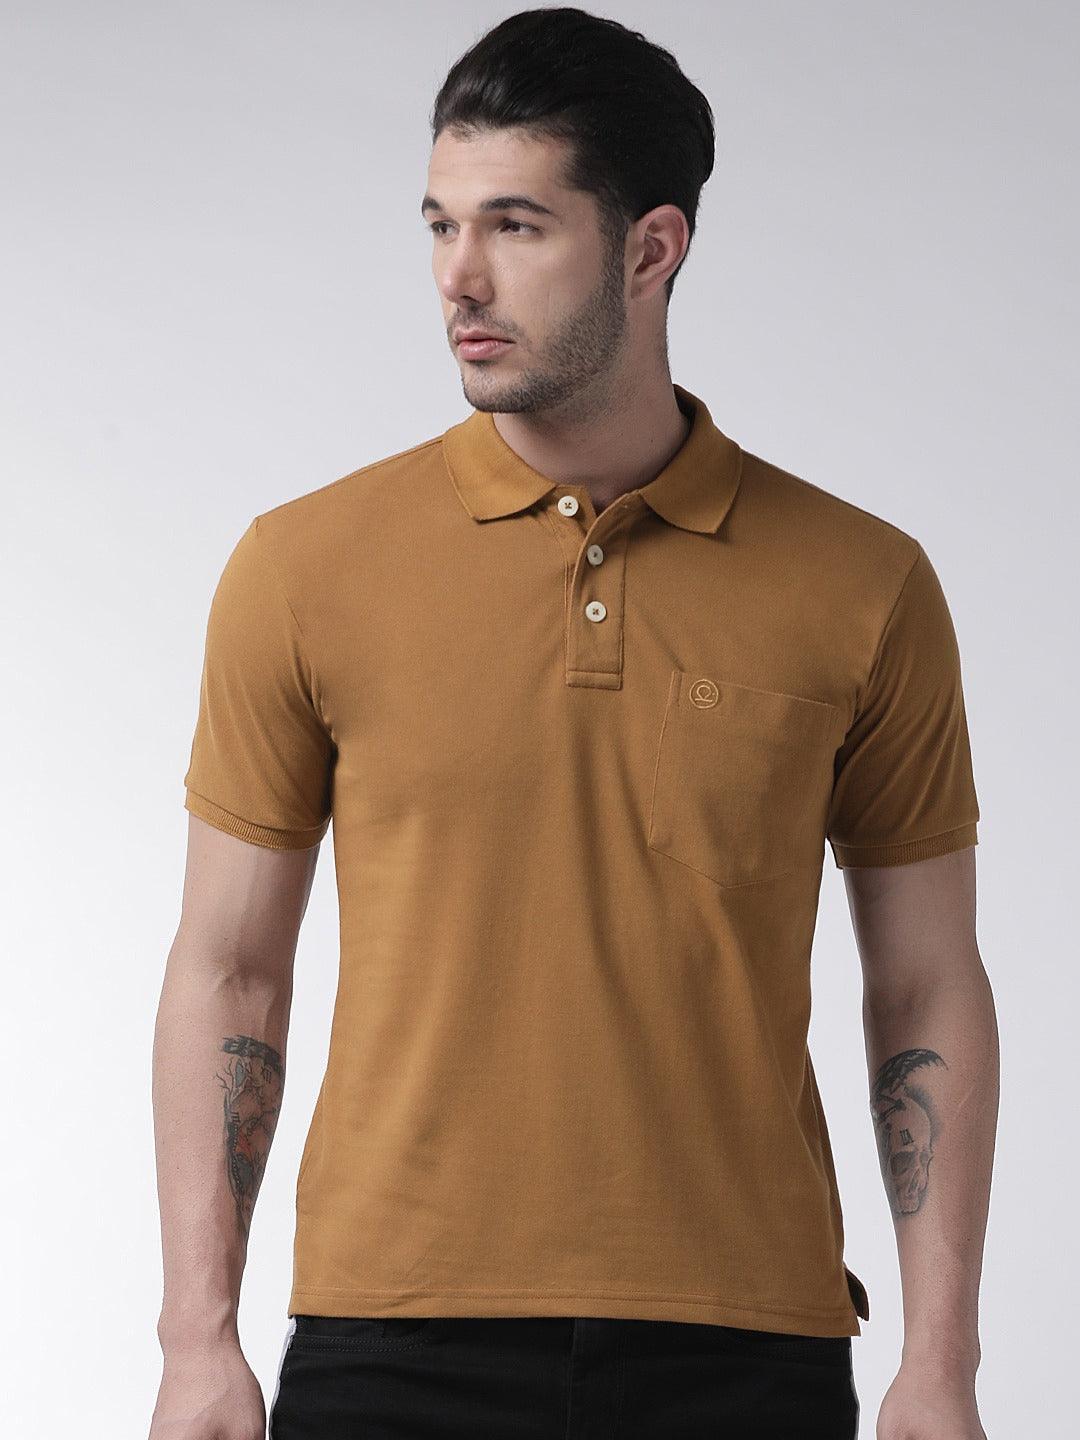 Men's Gold Brown Half Sleeves Polo T-shirt